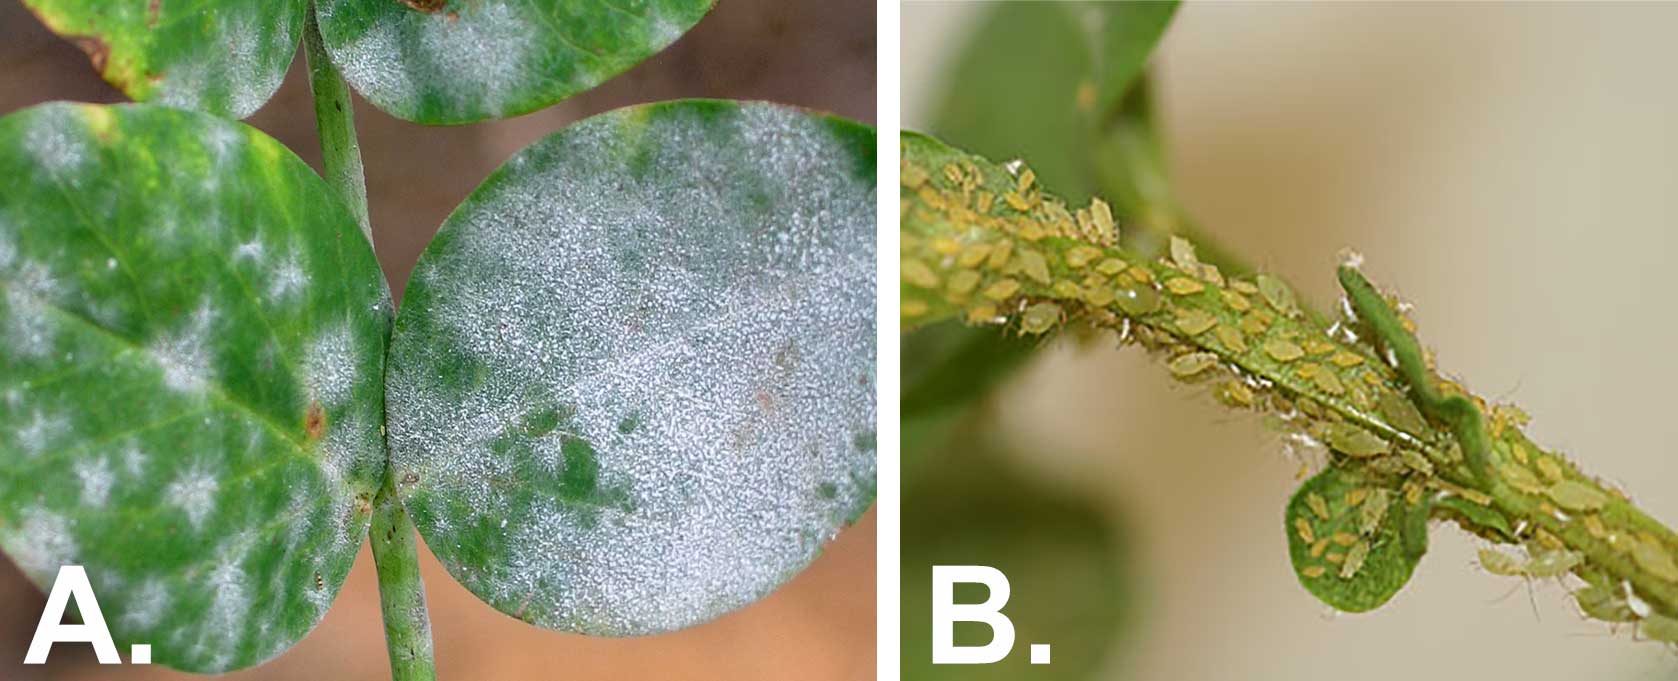 Two photos of common pea issues. The first is labeled "A" and shows white, powdery residue on pea leaves due to powdery mildew. The second is labeled "B" and shows numerous, small, lime-green pea aphids on a pea stem.